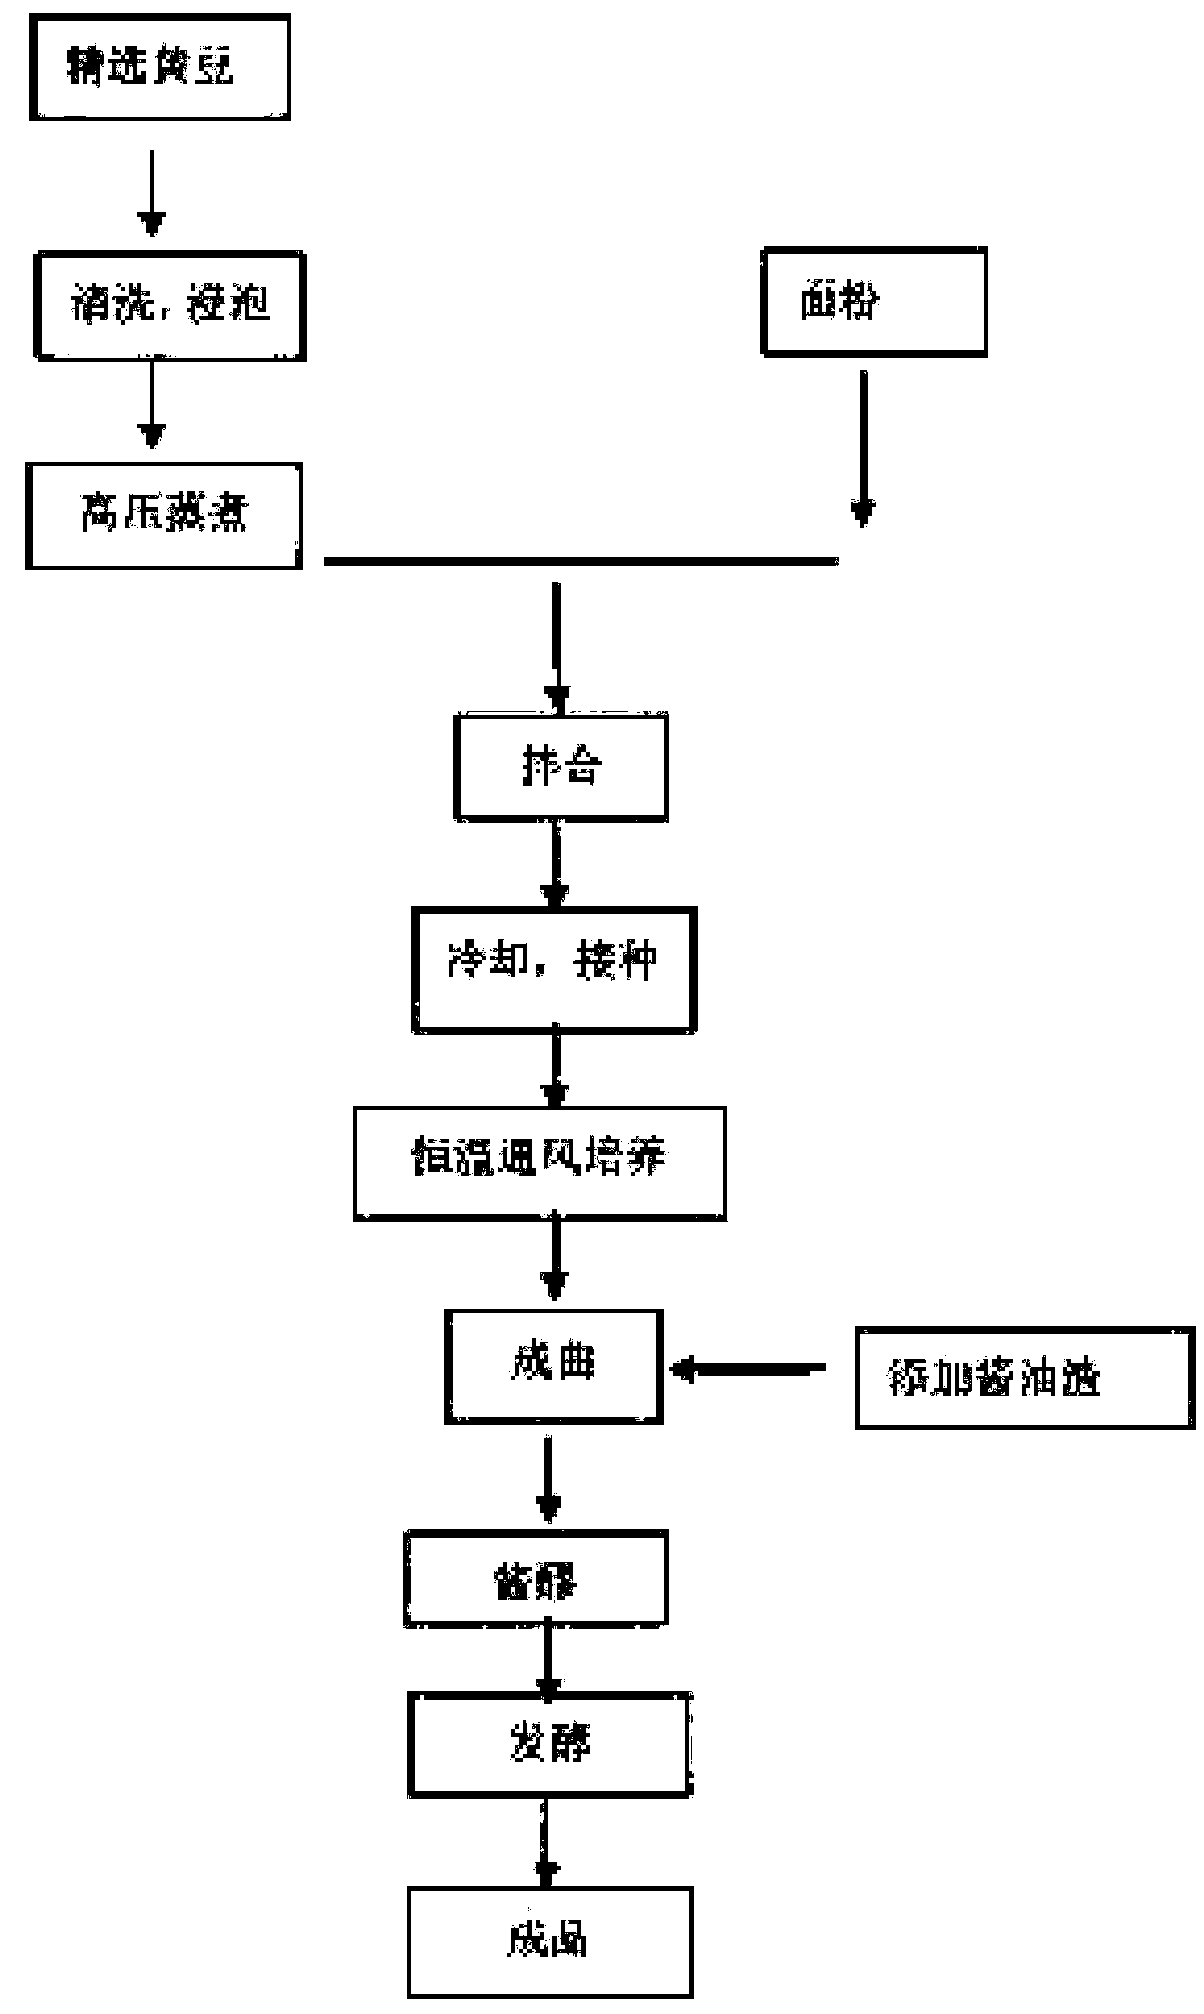 Method for manufacturing monascus fermented purplish red rice koji soybean sauce by using soybean residues and sauce residues